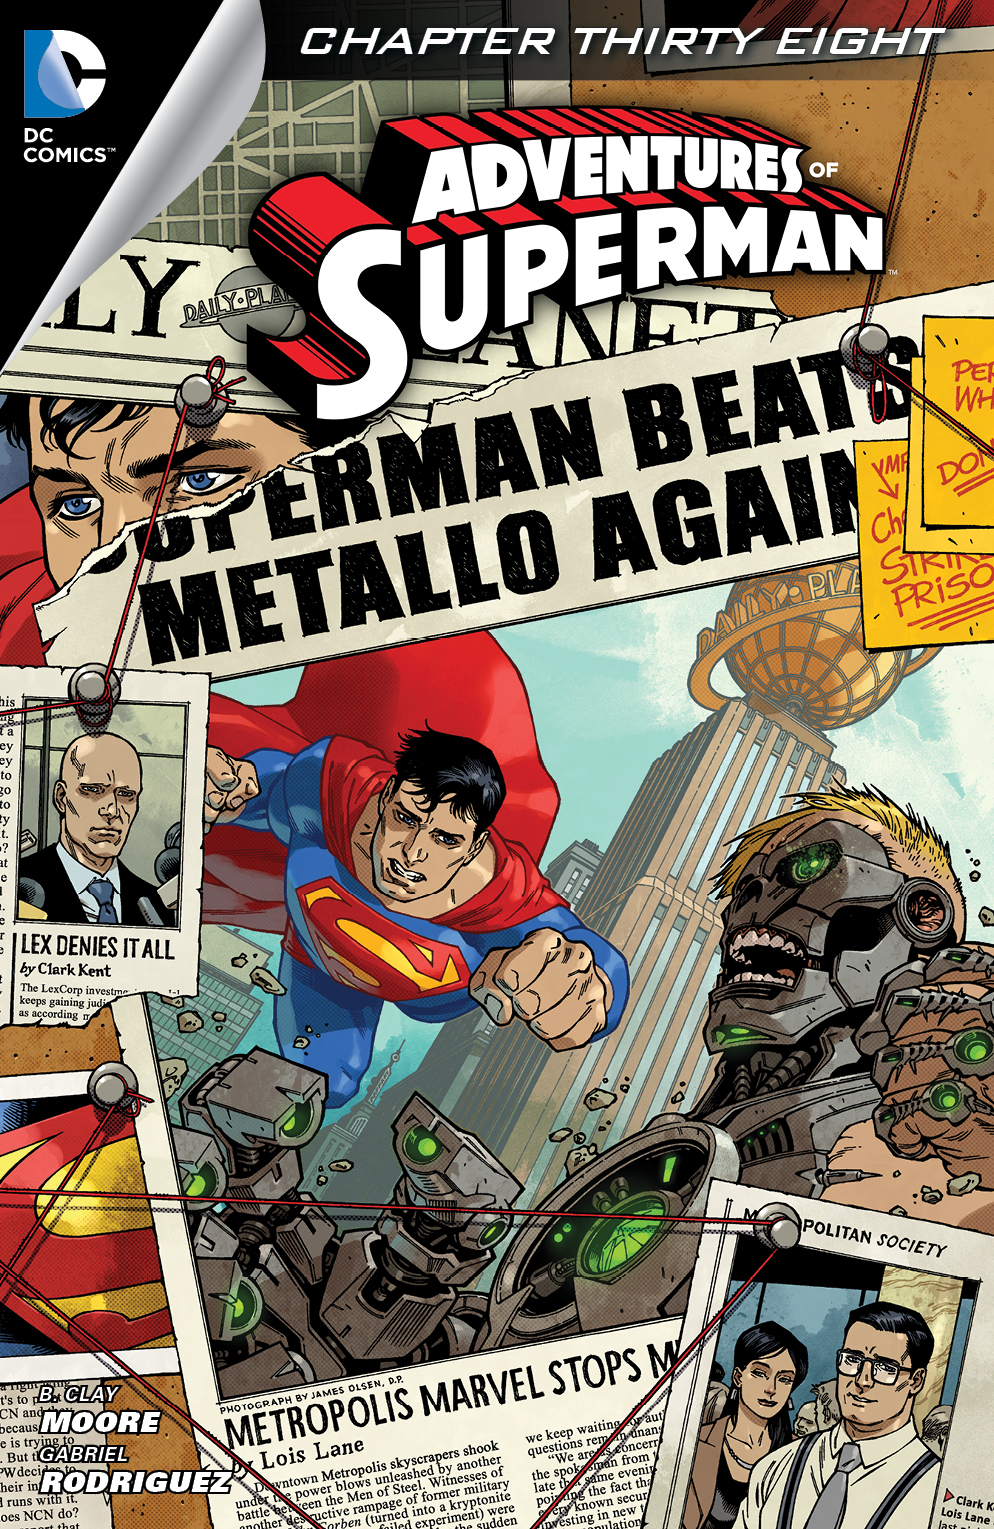 Adventures of Superman (2013-) #38 preview images